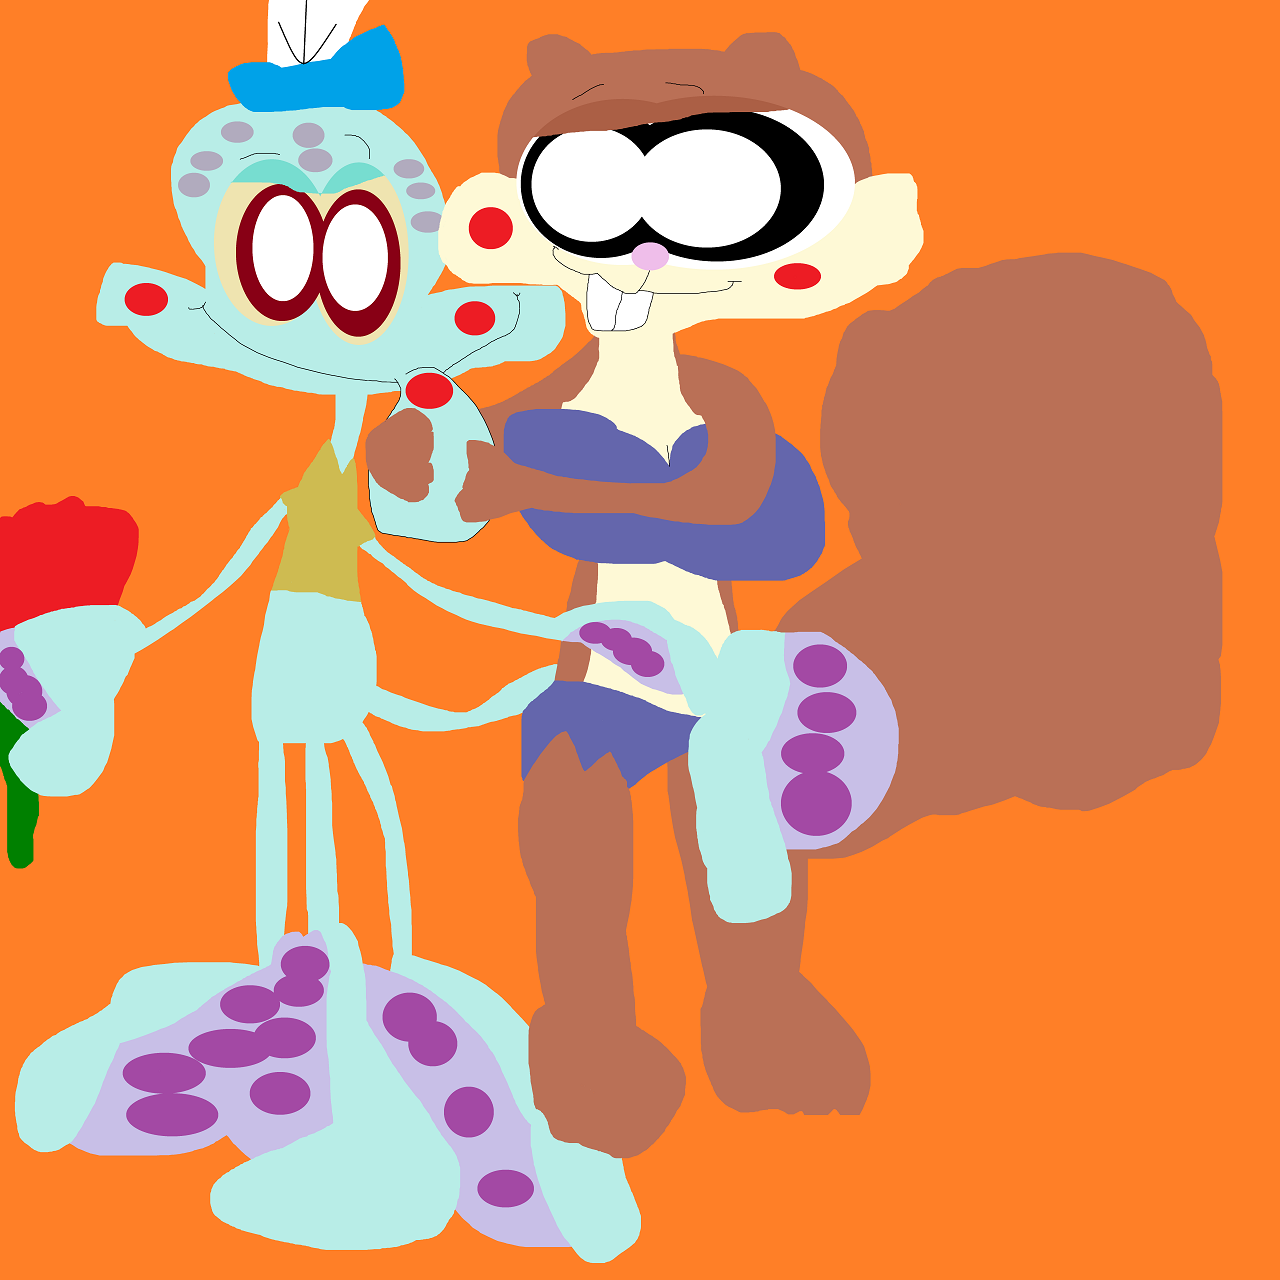 Squidward With A Big Rose For Sandy by Falconlobo